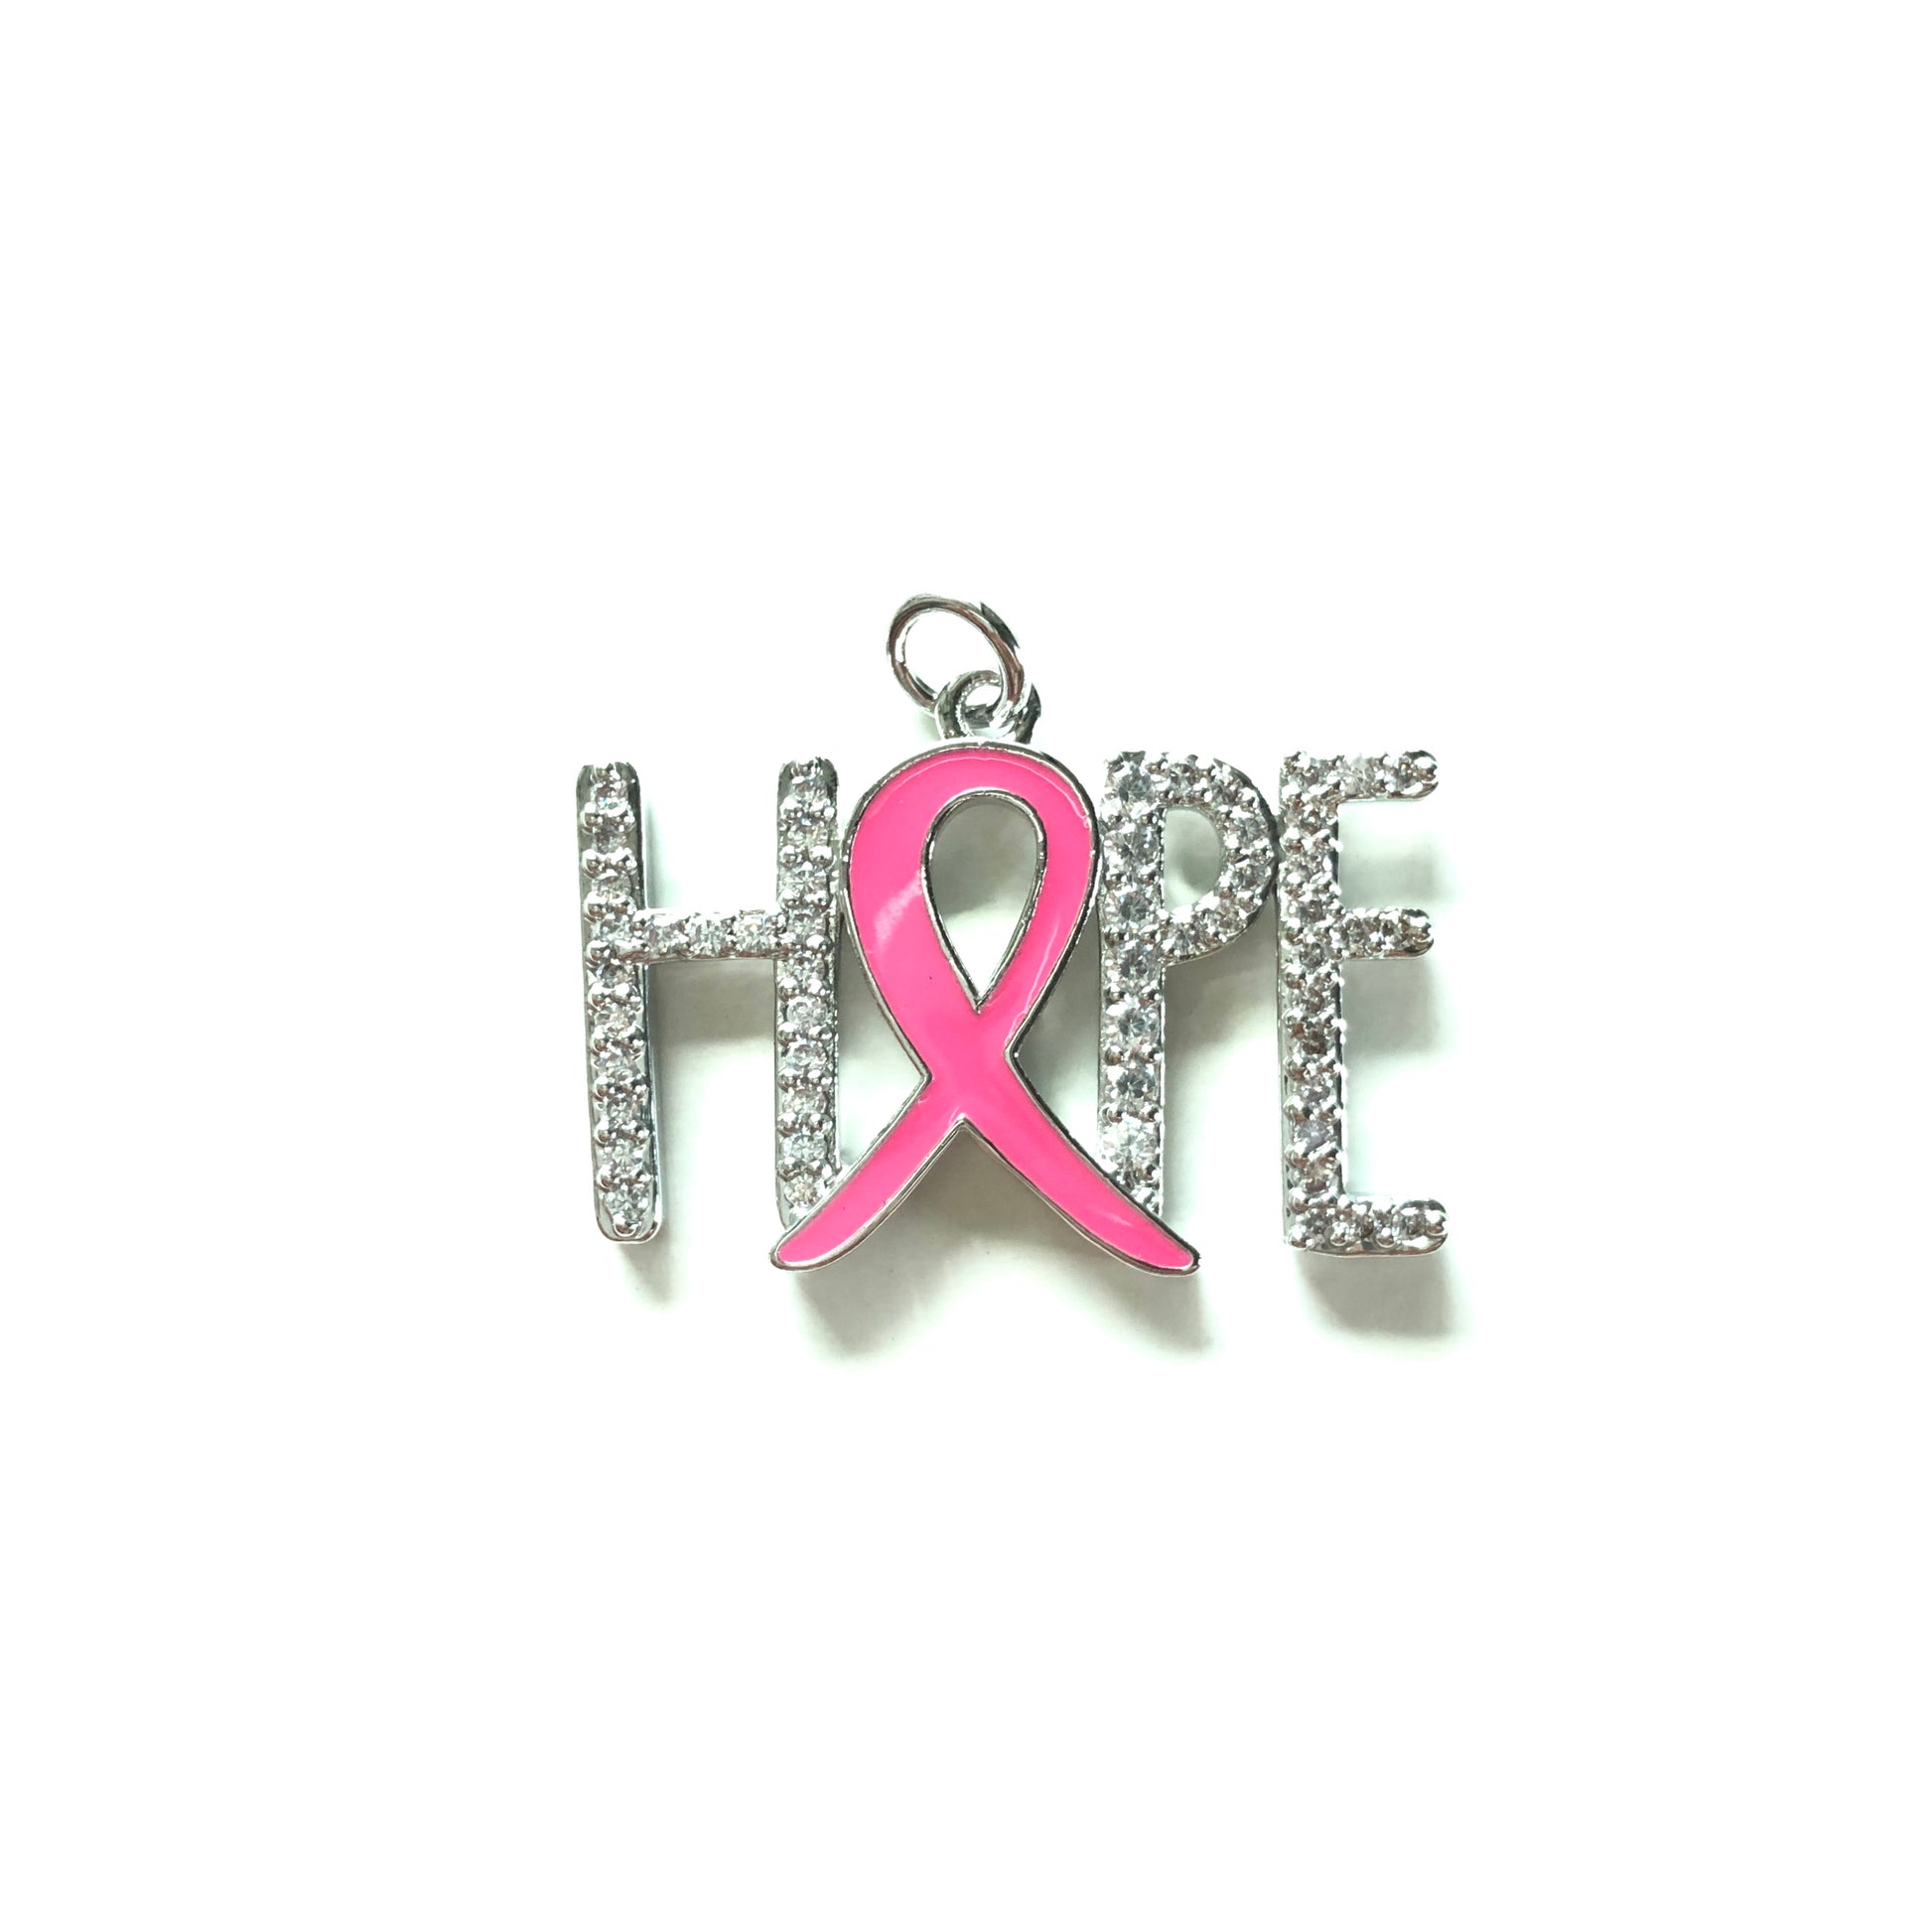 10pcs/lot CZ Paved Pink Ribbon Hope Charms - Breast Cancer Awareness Silver CZ Paved Charms Breast Cancer Awareness Charms Beads Beyond